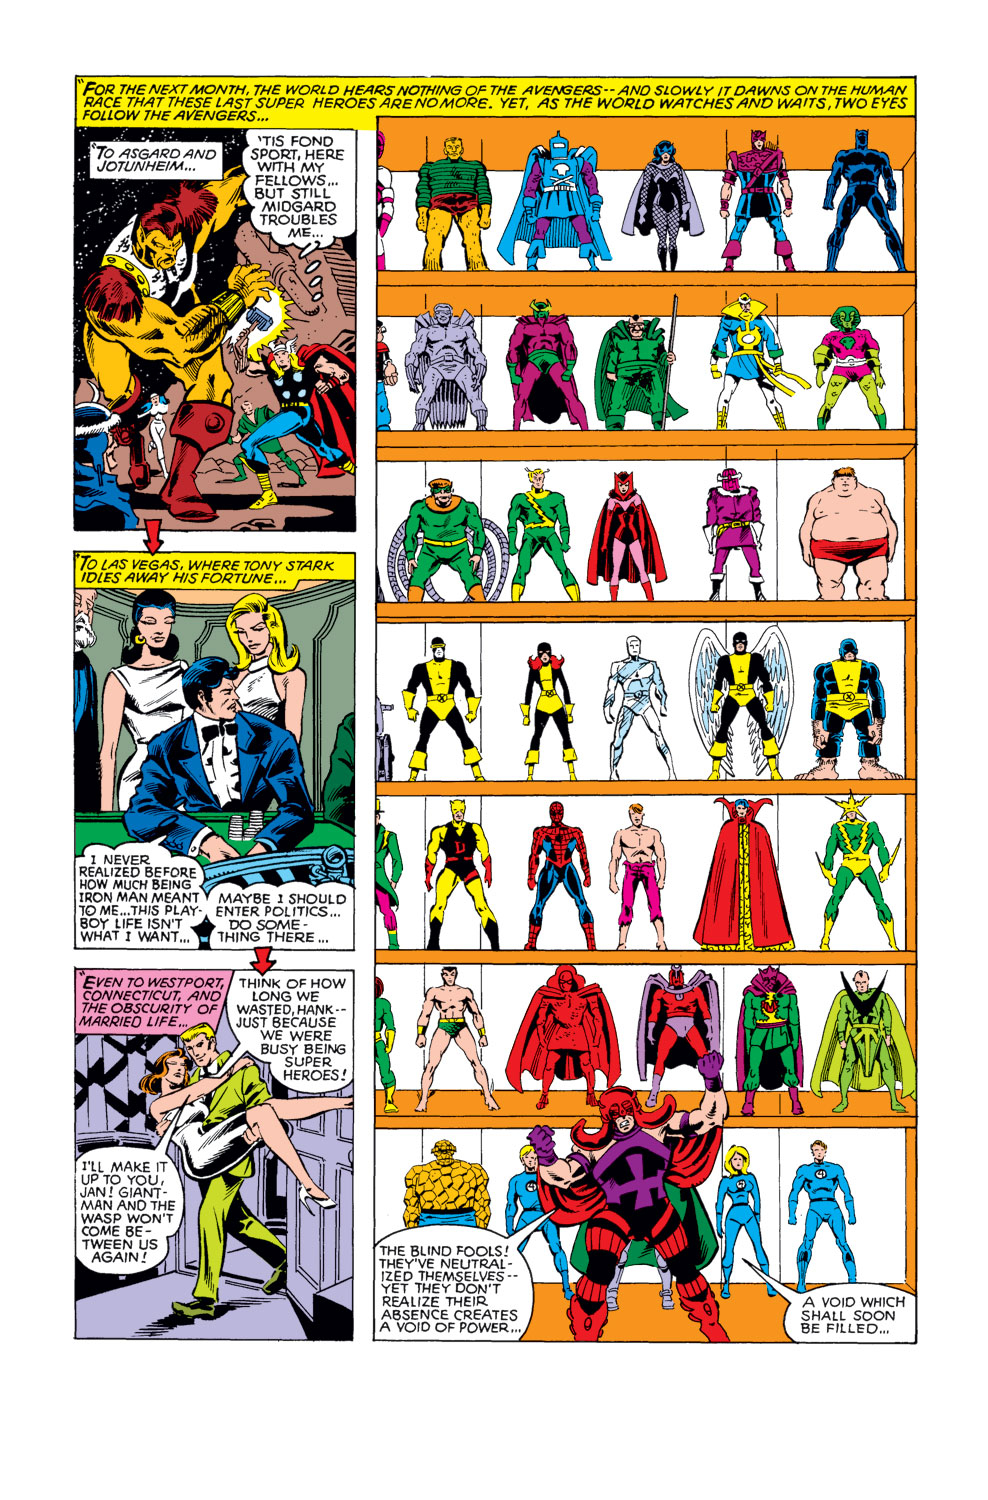 What If? (1977) issue 29 - The Avengers defeated everybody - Page 13